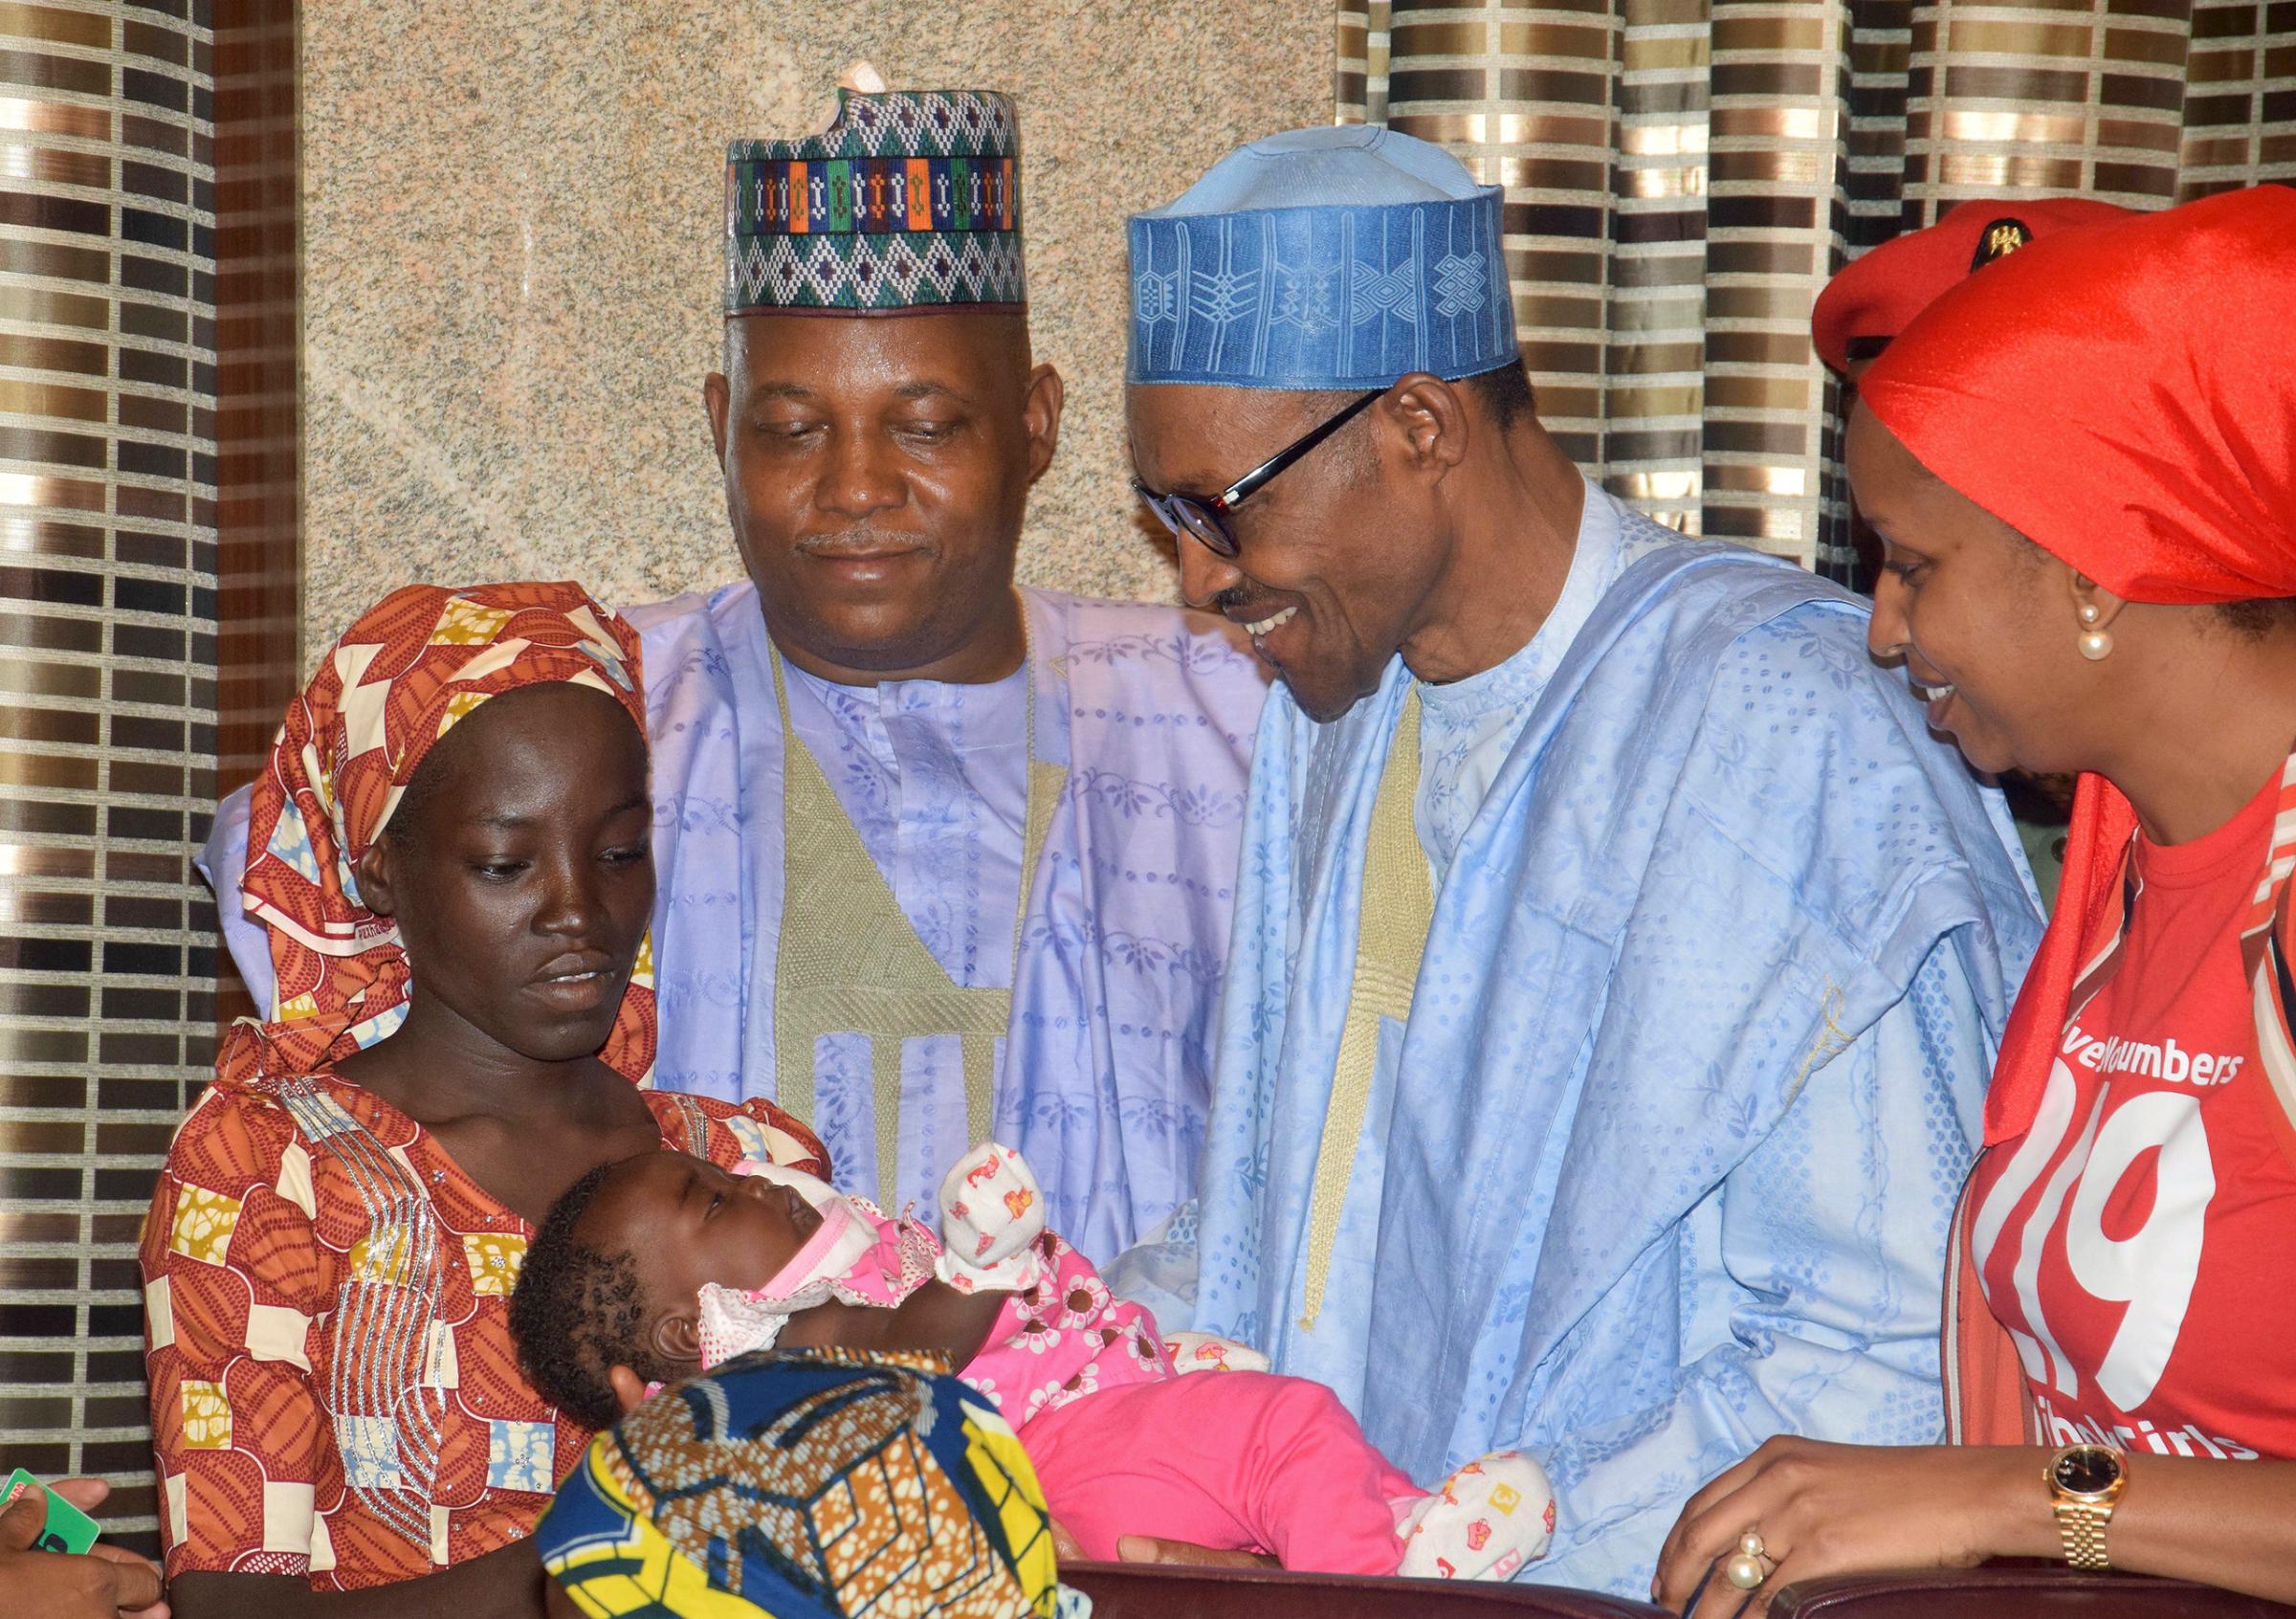 Nigerian President Muhammadu Buhari, second right, receives Amina Ali, the first rescued Chibok school girl, at the Presidential palace in Abuja, Nigeria, May. 19, 2016.